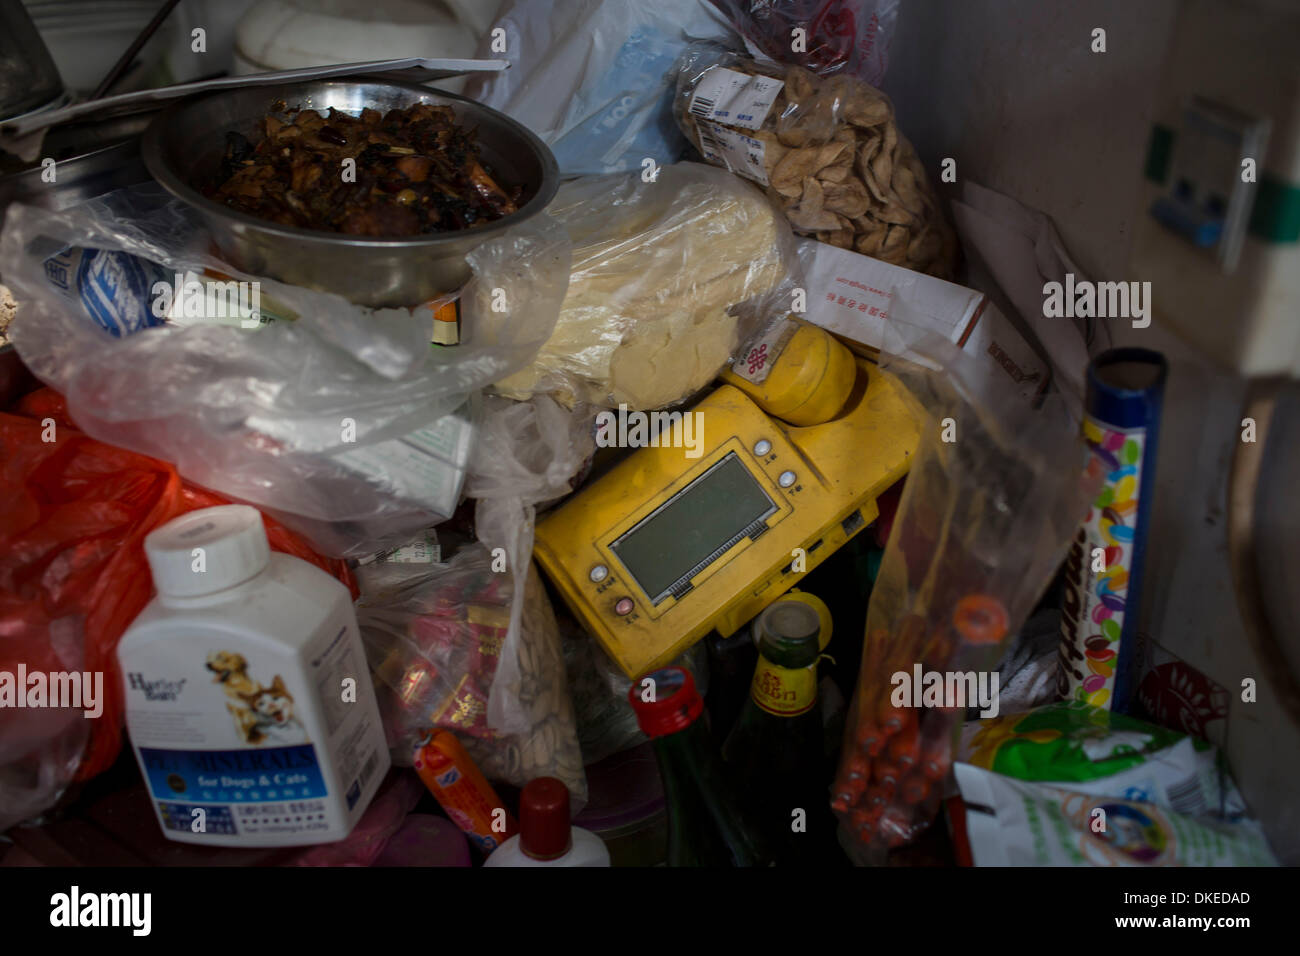 Beijing, China. 1st Dec, 2013. YILAN ZHAO cluttered living room at her home. Zhao, 58 years-old, lives at No. 264 Deshengmen Inner Street, Xicheng District. Zhao is illiterate, has no stable job or income and her husband is disabled and bedridden. For her, life is very hard, but she finds happiness is rescuing homeless dogs. Since 2001 she has been caring for stray dogs. © Jiwei Han/ZUMA Wire/ZUMAPRESS.com/Alamy Live News Stock Photo